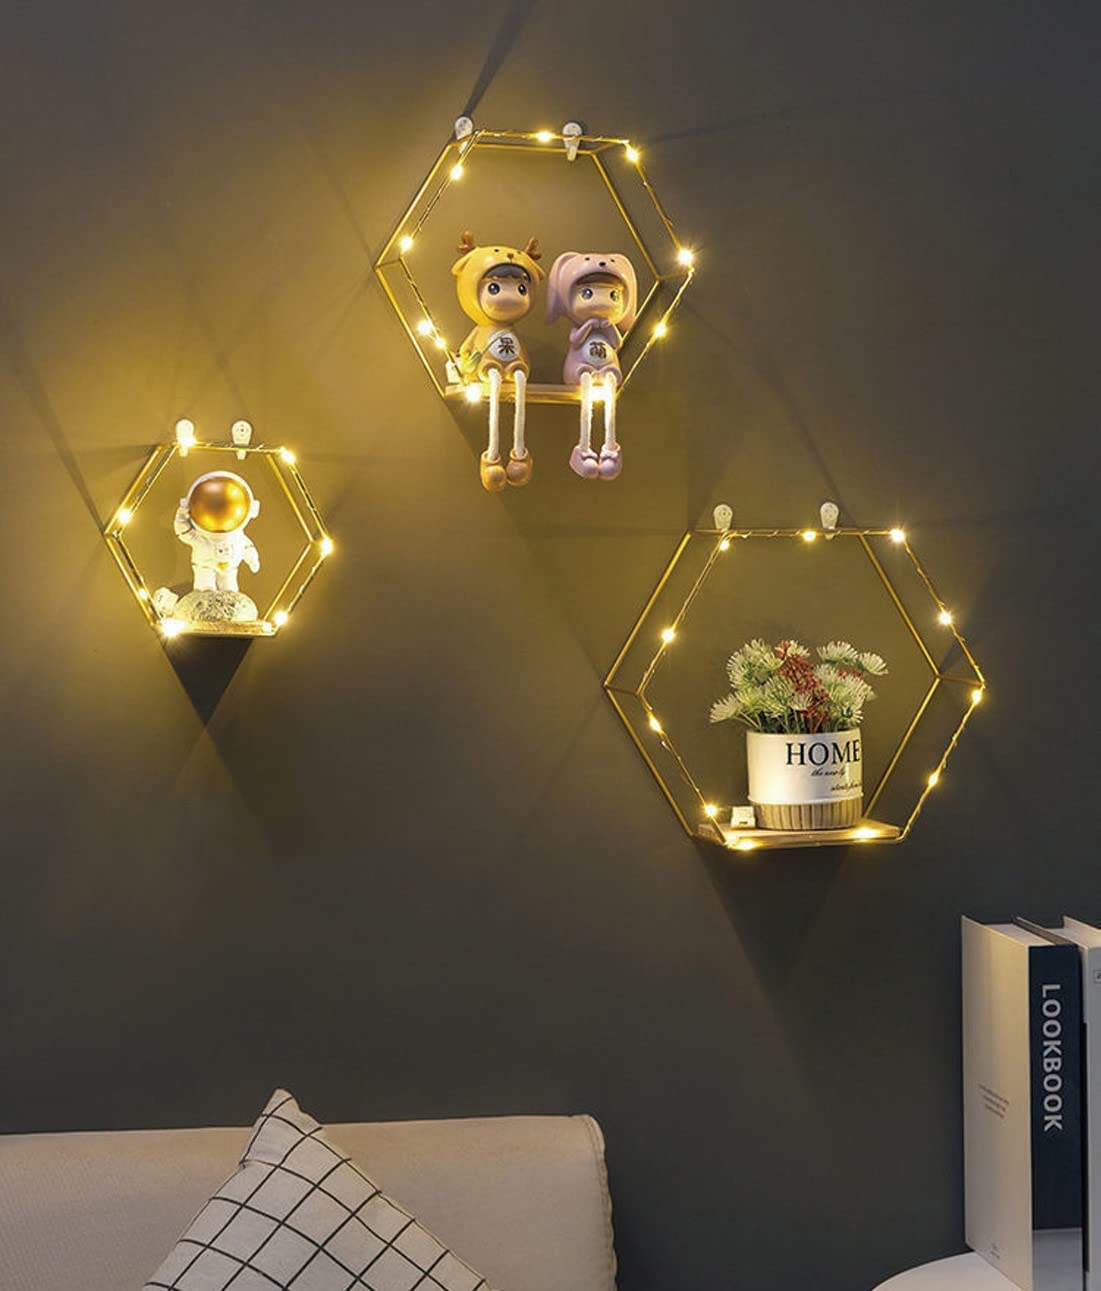 Hexagon Floating Shelves Wall Decor, Gold Metal Wire and Wood Wall Mounted Storage Shelf Home Decorations Art for Bedroom Living Room Kitchen Bathroom, Set of 3 with LED Lights